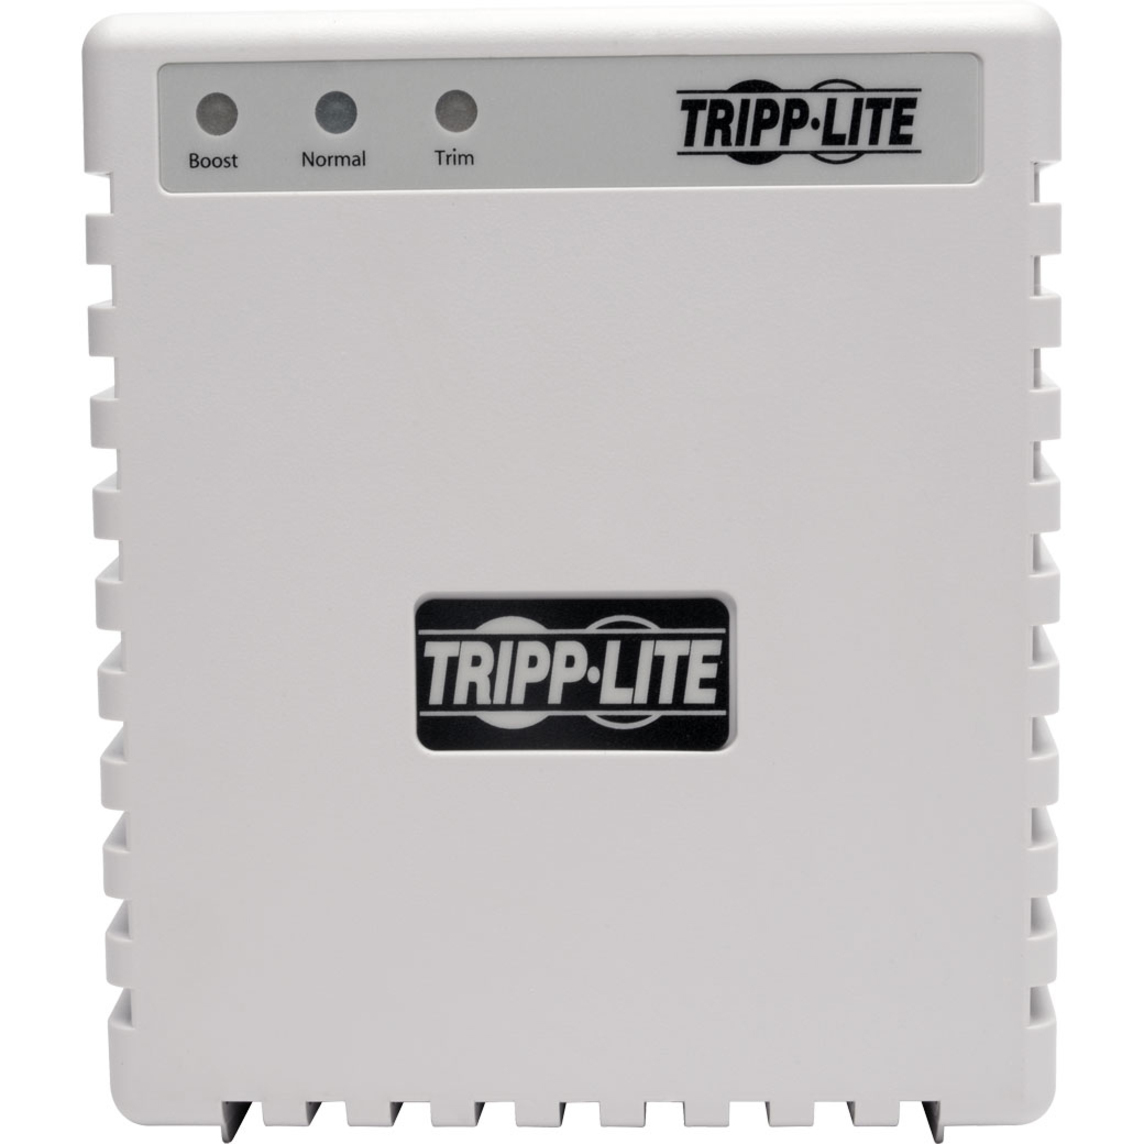 Tripp Lite by Eaton 600W 230V Power Conditioner with Automatic Voltage Regulation (AVR), AC Surge Protection, 3 Outlets, UNIPLUGINT Adapter - image 3 of 4